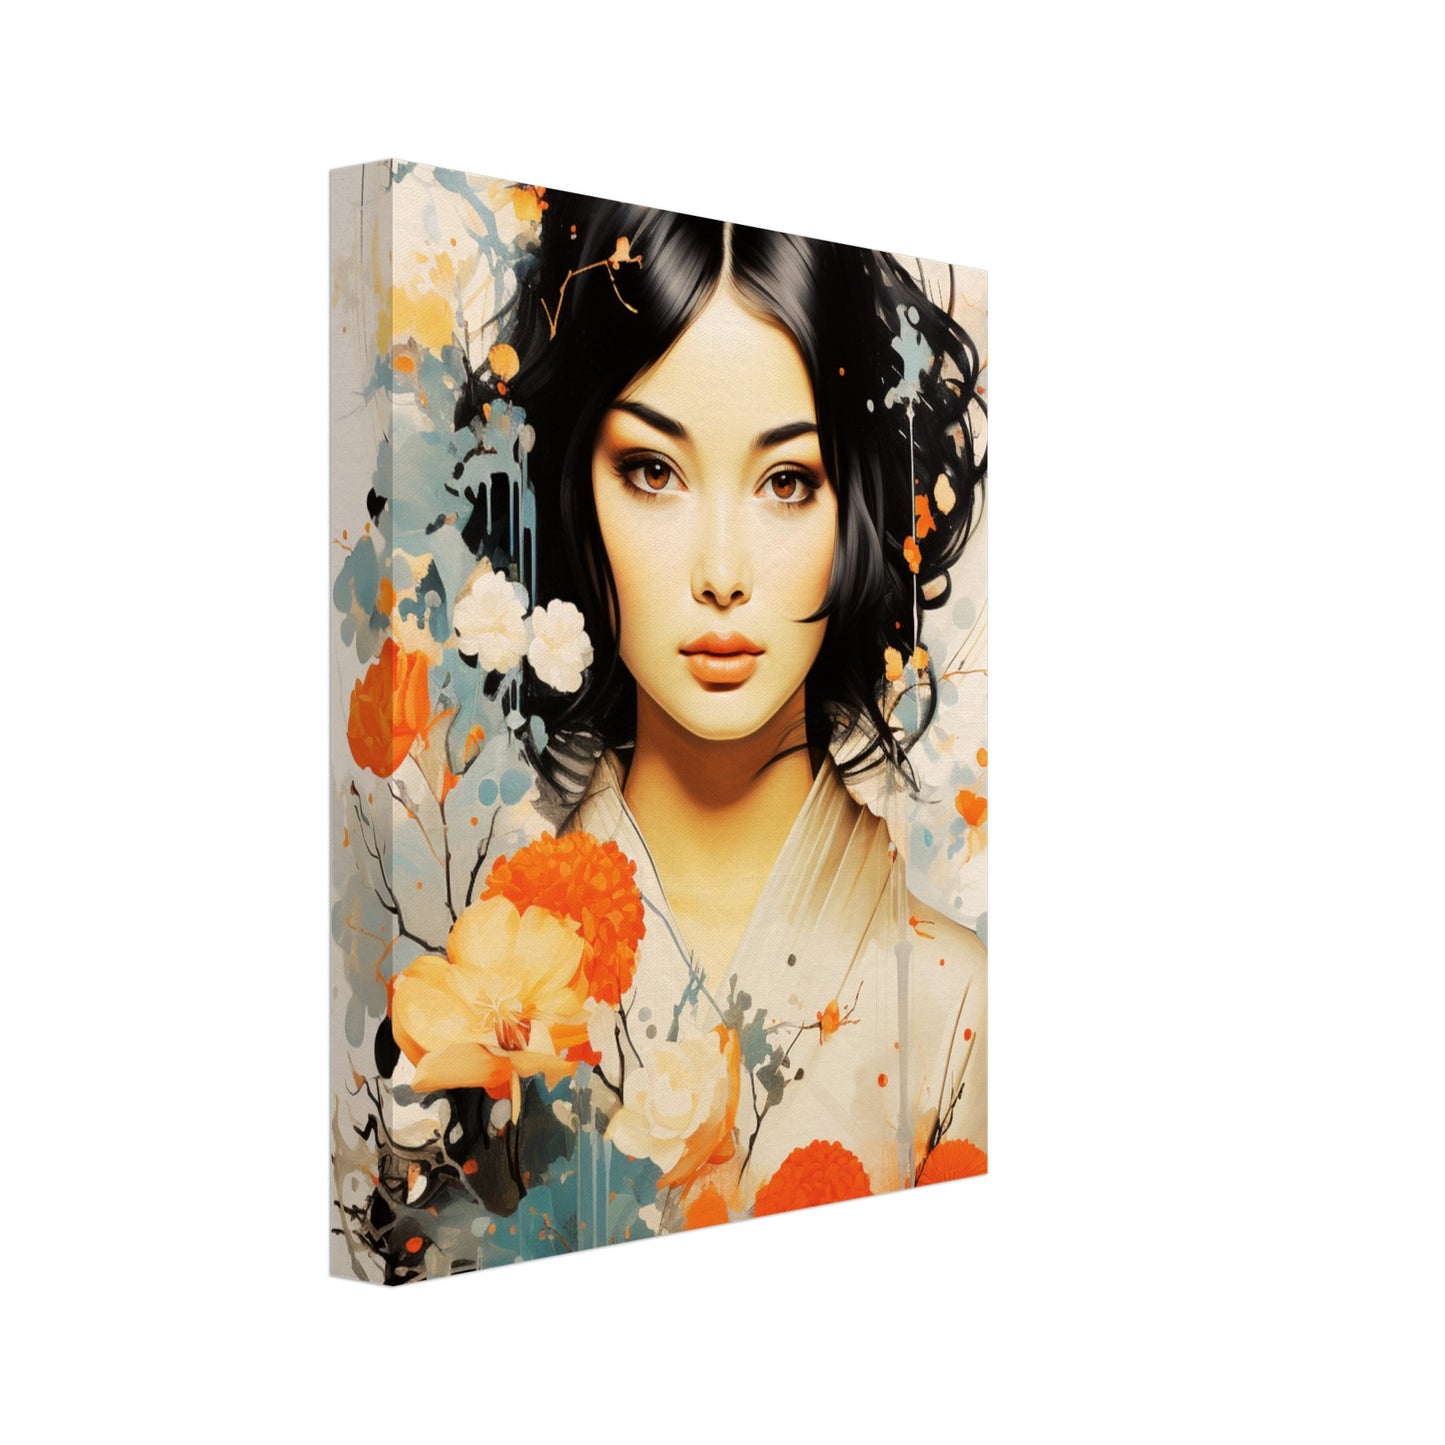 Japanese Girl and Flowers | Wall art